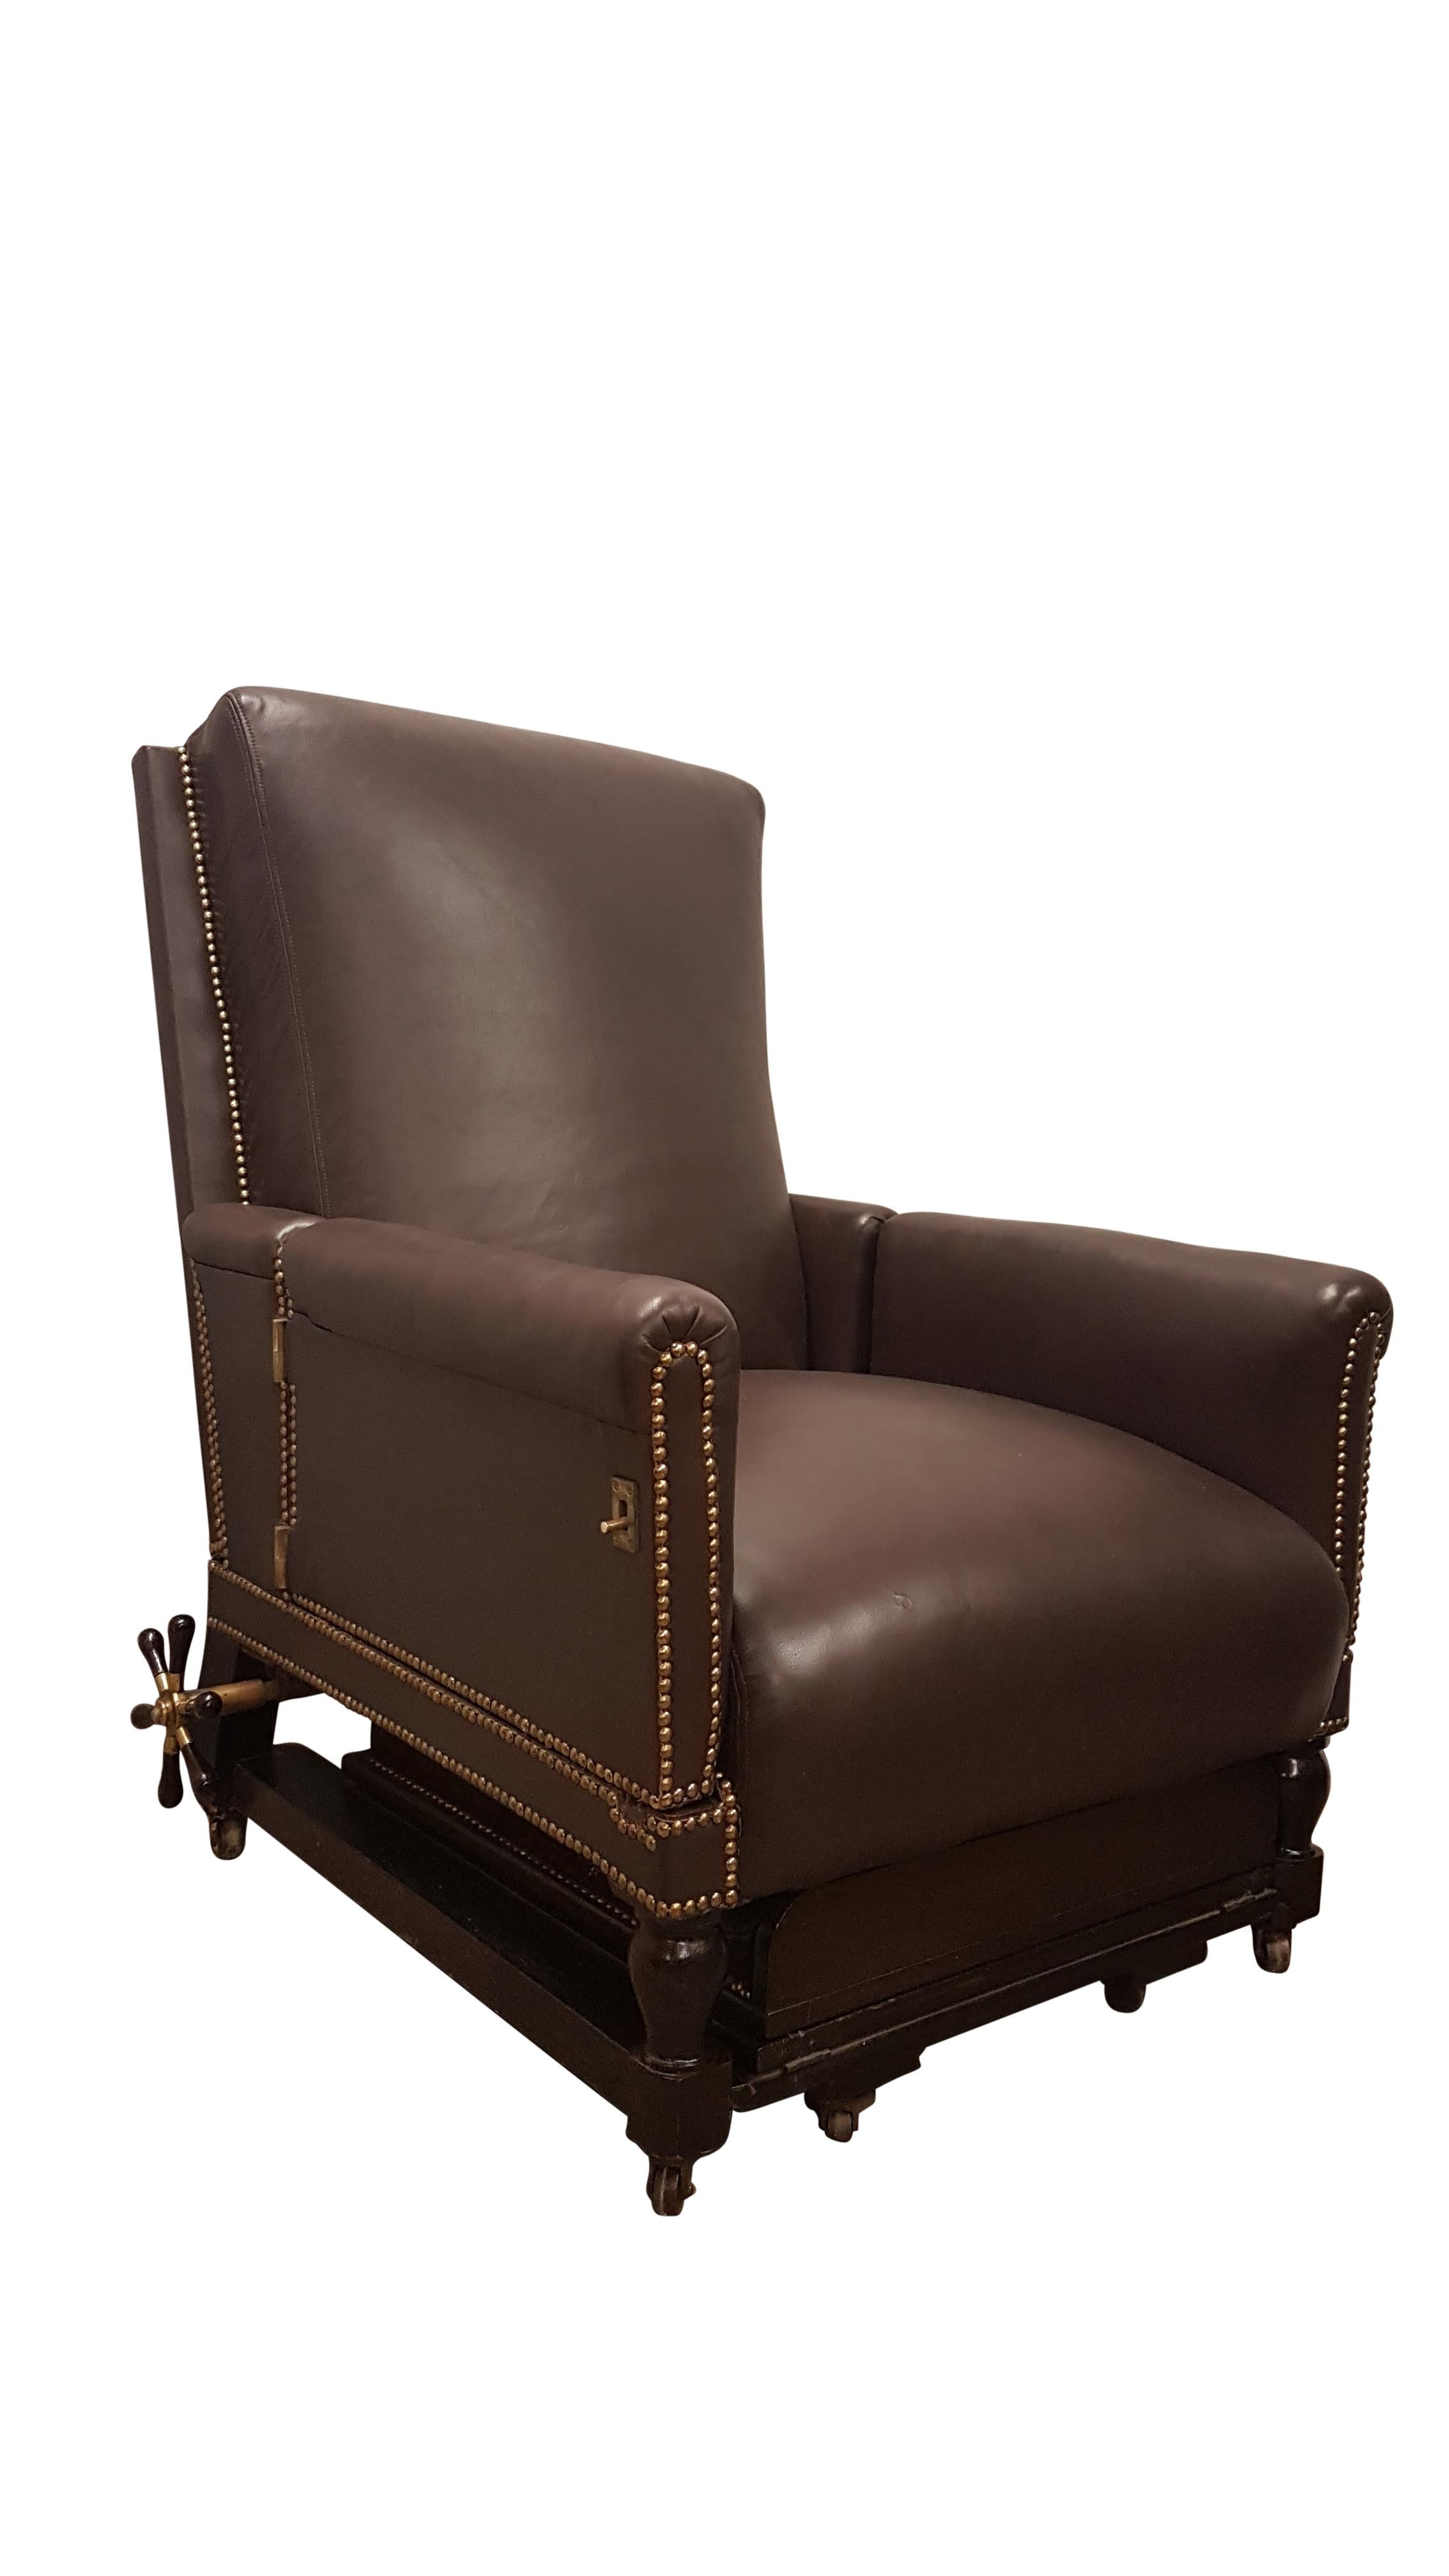 This is a large grand 19th century fully adjustable armchair that has been fully reupholstered in Connolly leather. Connolly leather supply amongst others Aston Martin. The back on the chair reclines with the use of a very unique winding mechanism